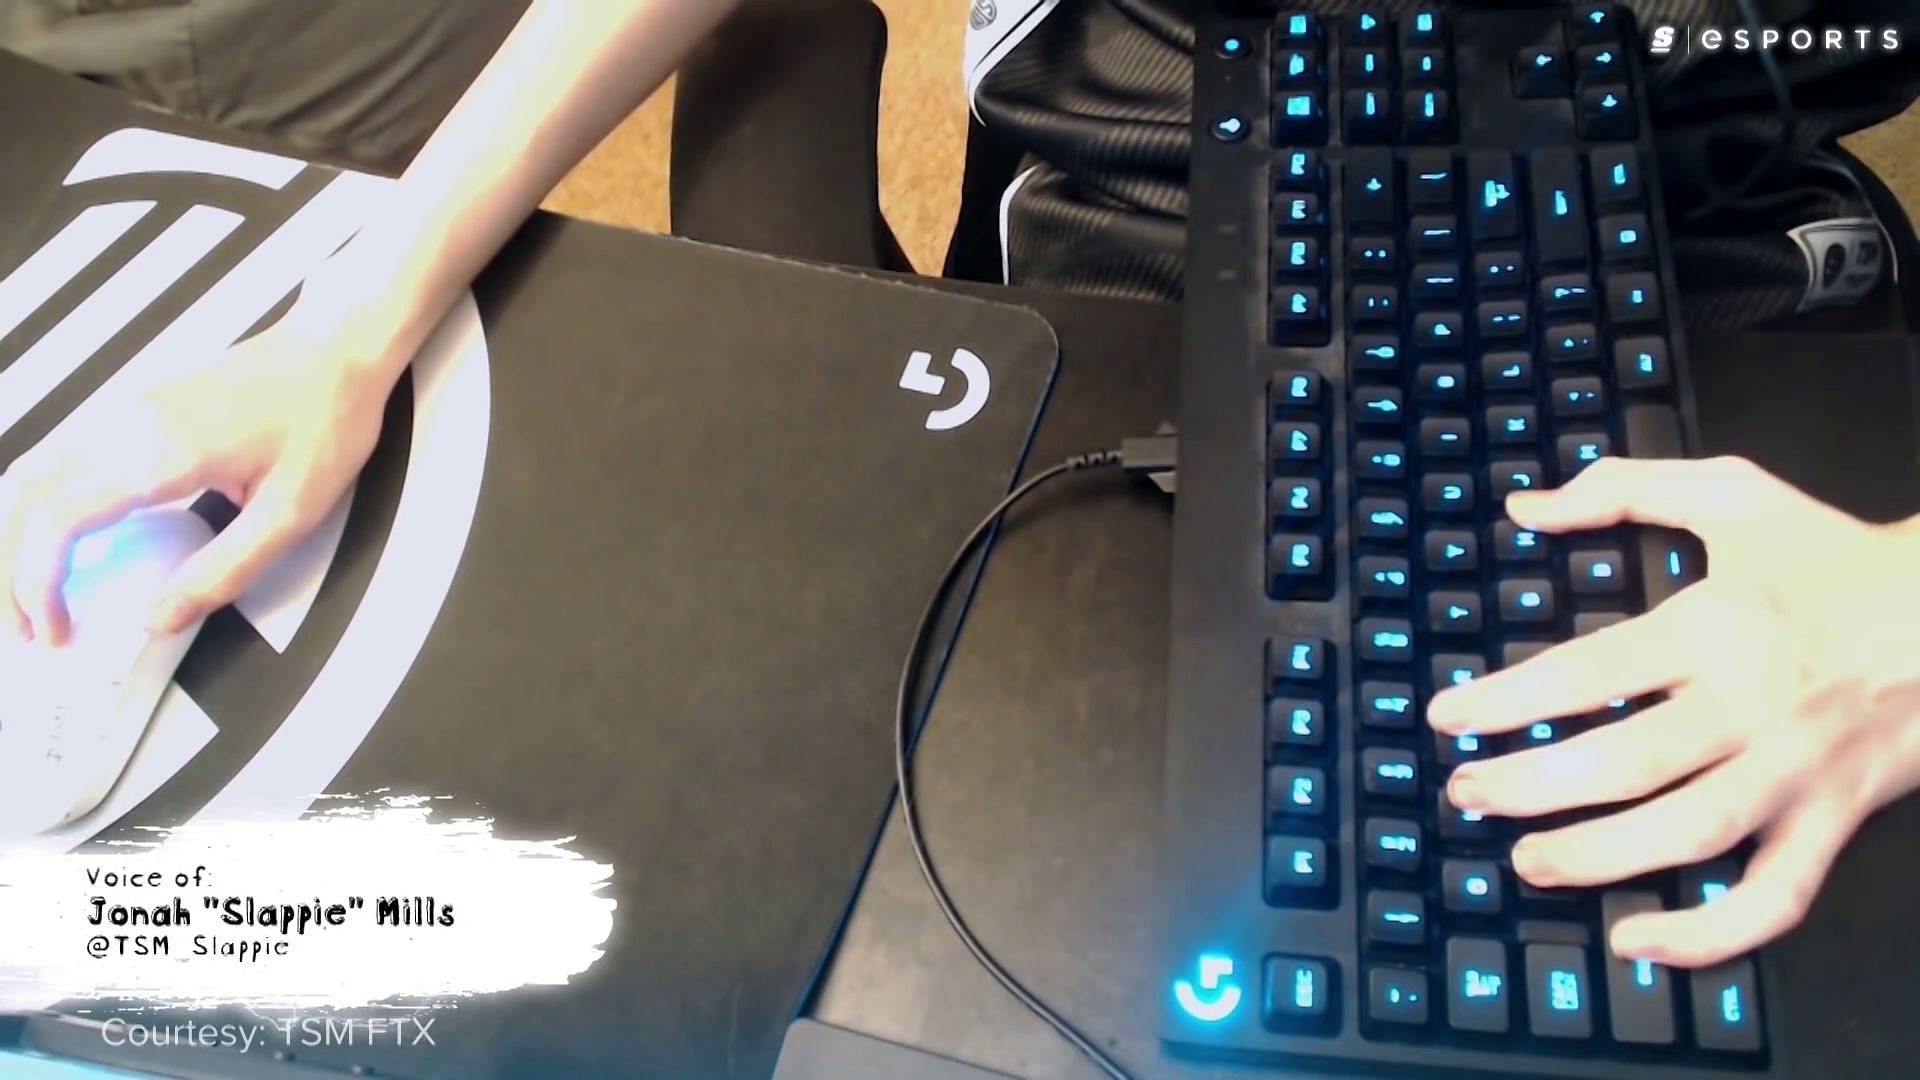 Tilting the keyboard gives access to more keys (Image via YouTube/theScoreesports)